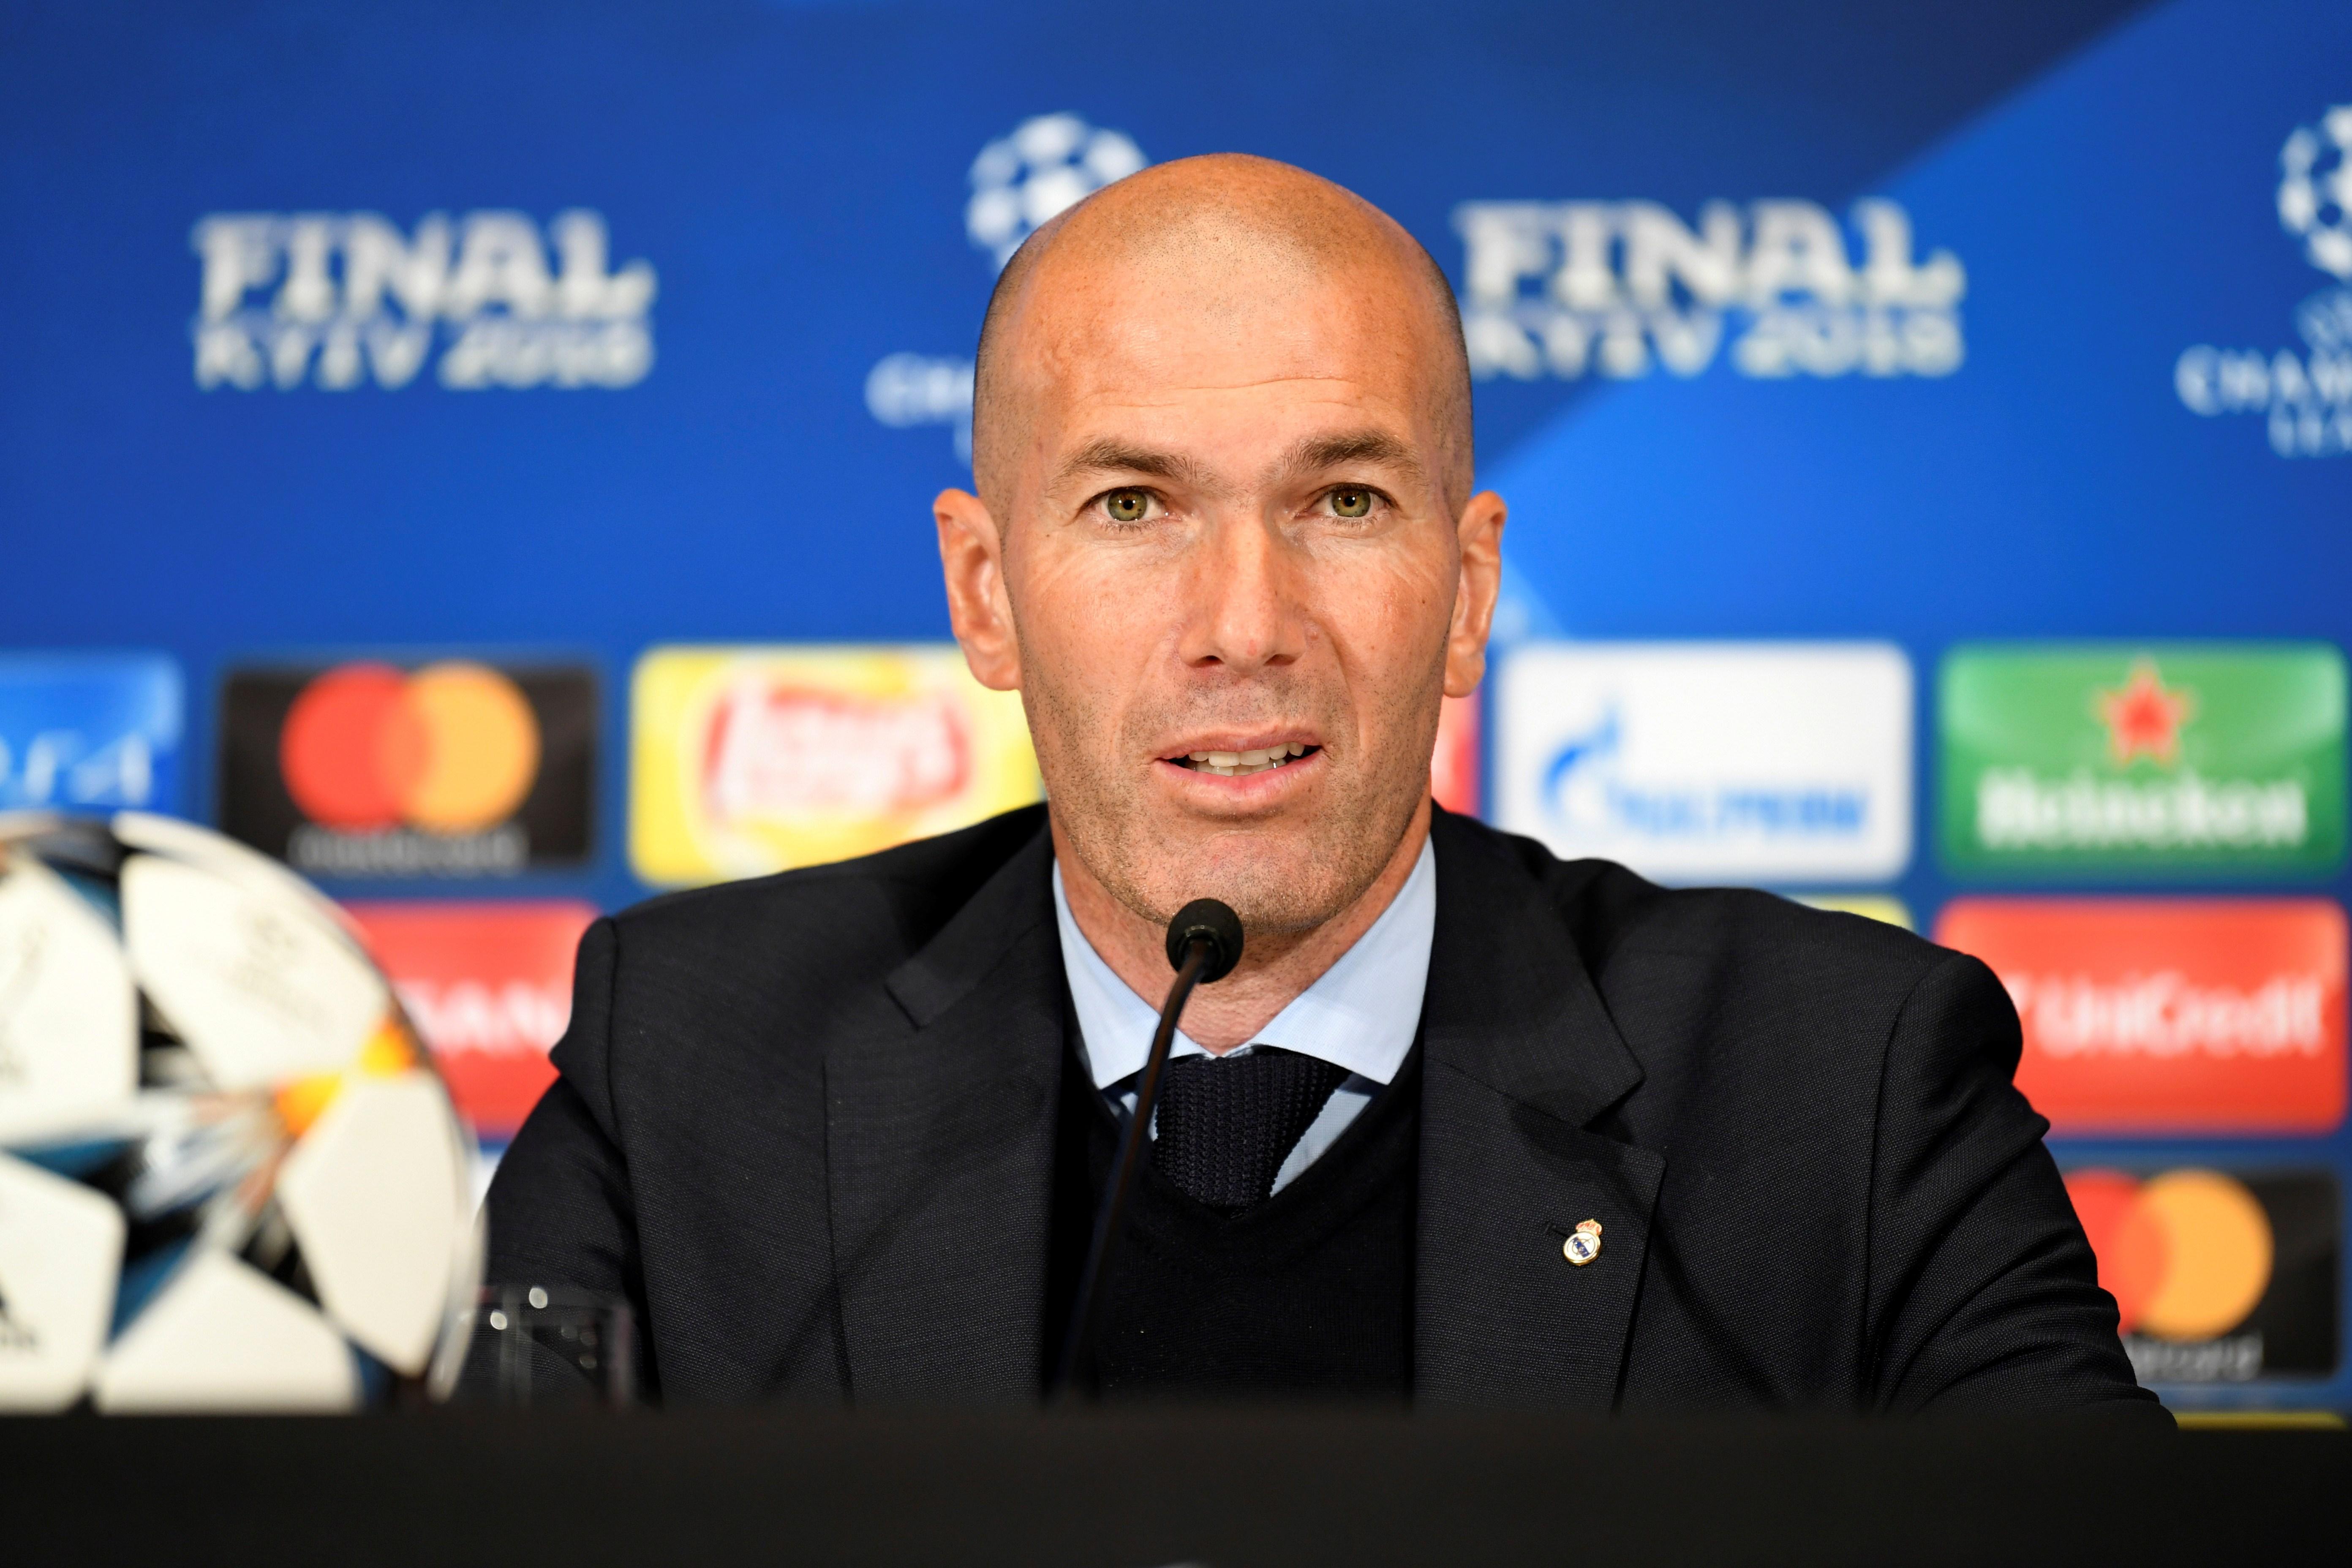 Zidane announces surprise departure from Real Madrid